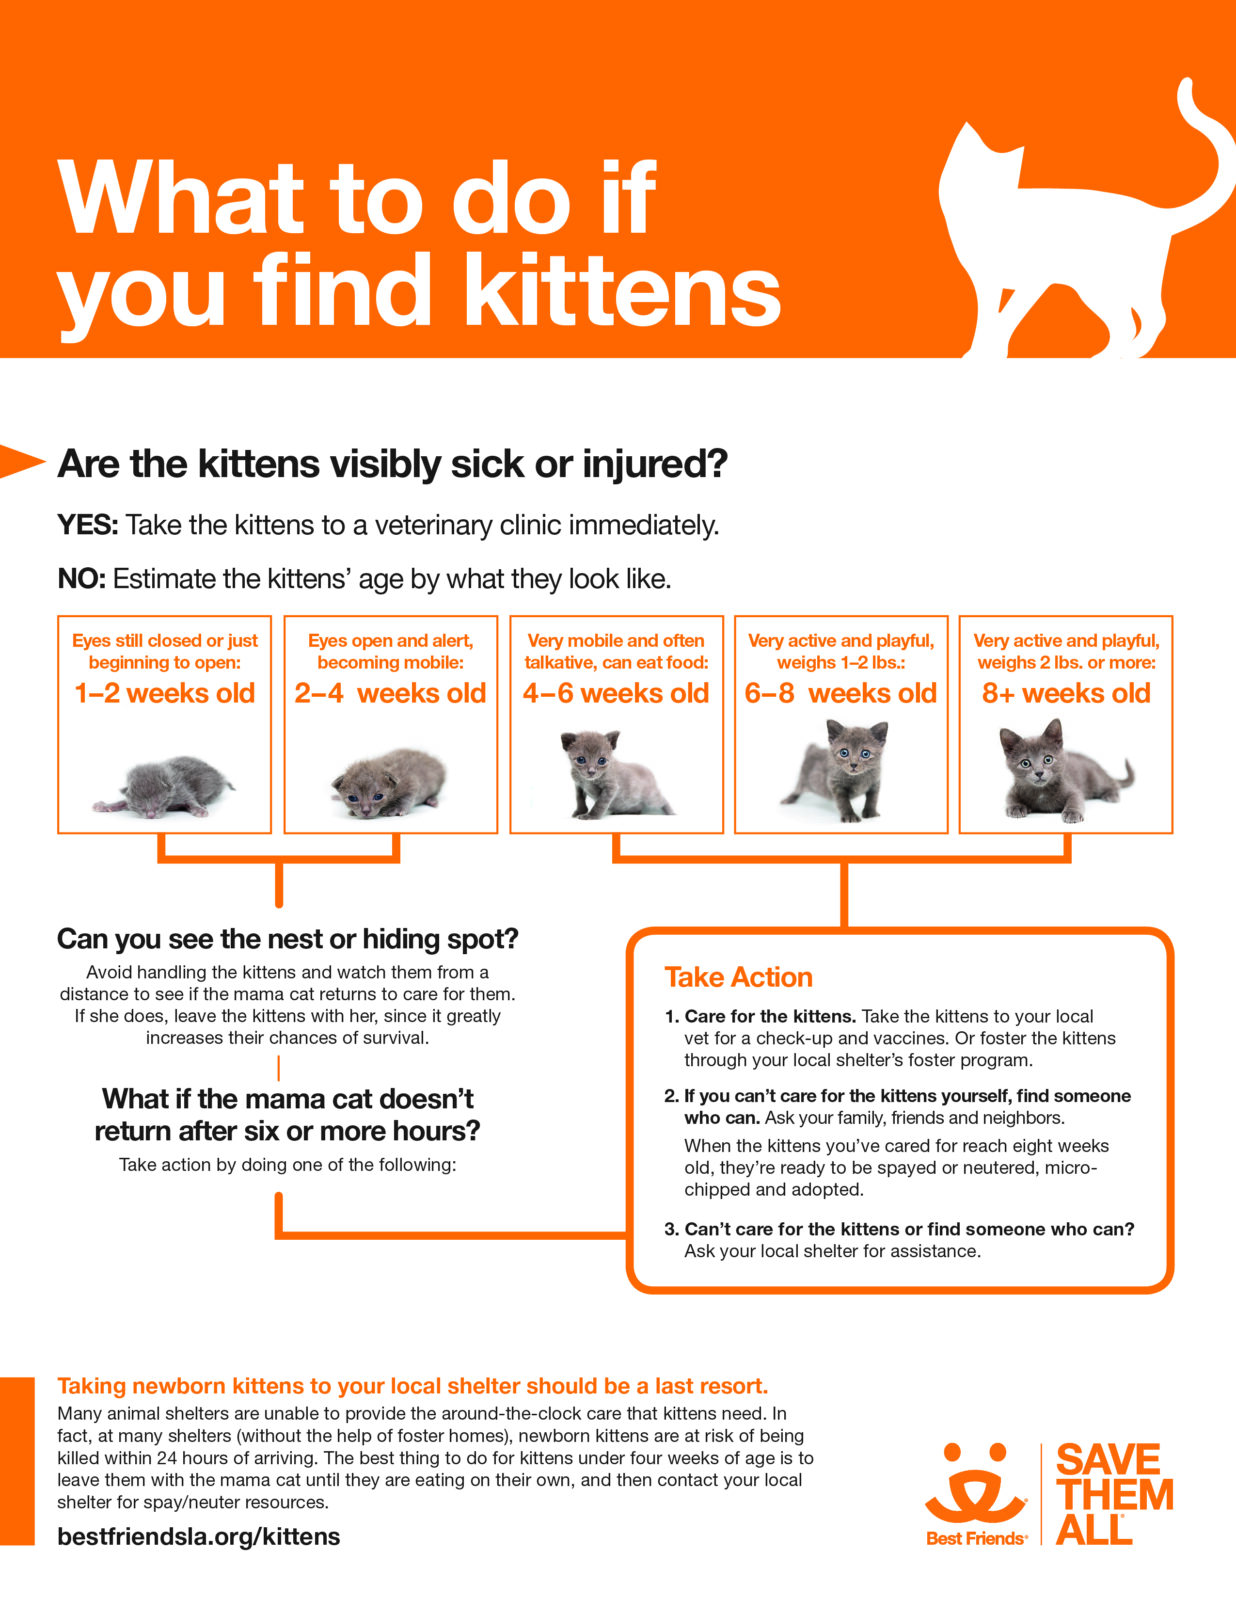 A Best Friends infographic indicating what to do if one finds lost kittens. Tips include assessing for visible sickness or injury, assessing their age, looking for a nest or hiding spot, and as a last resort taking the kittens to a shelter.